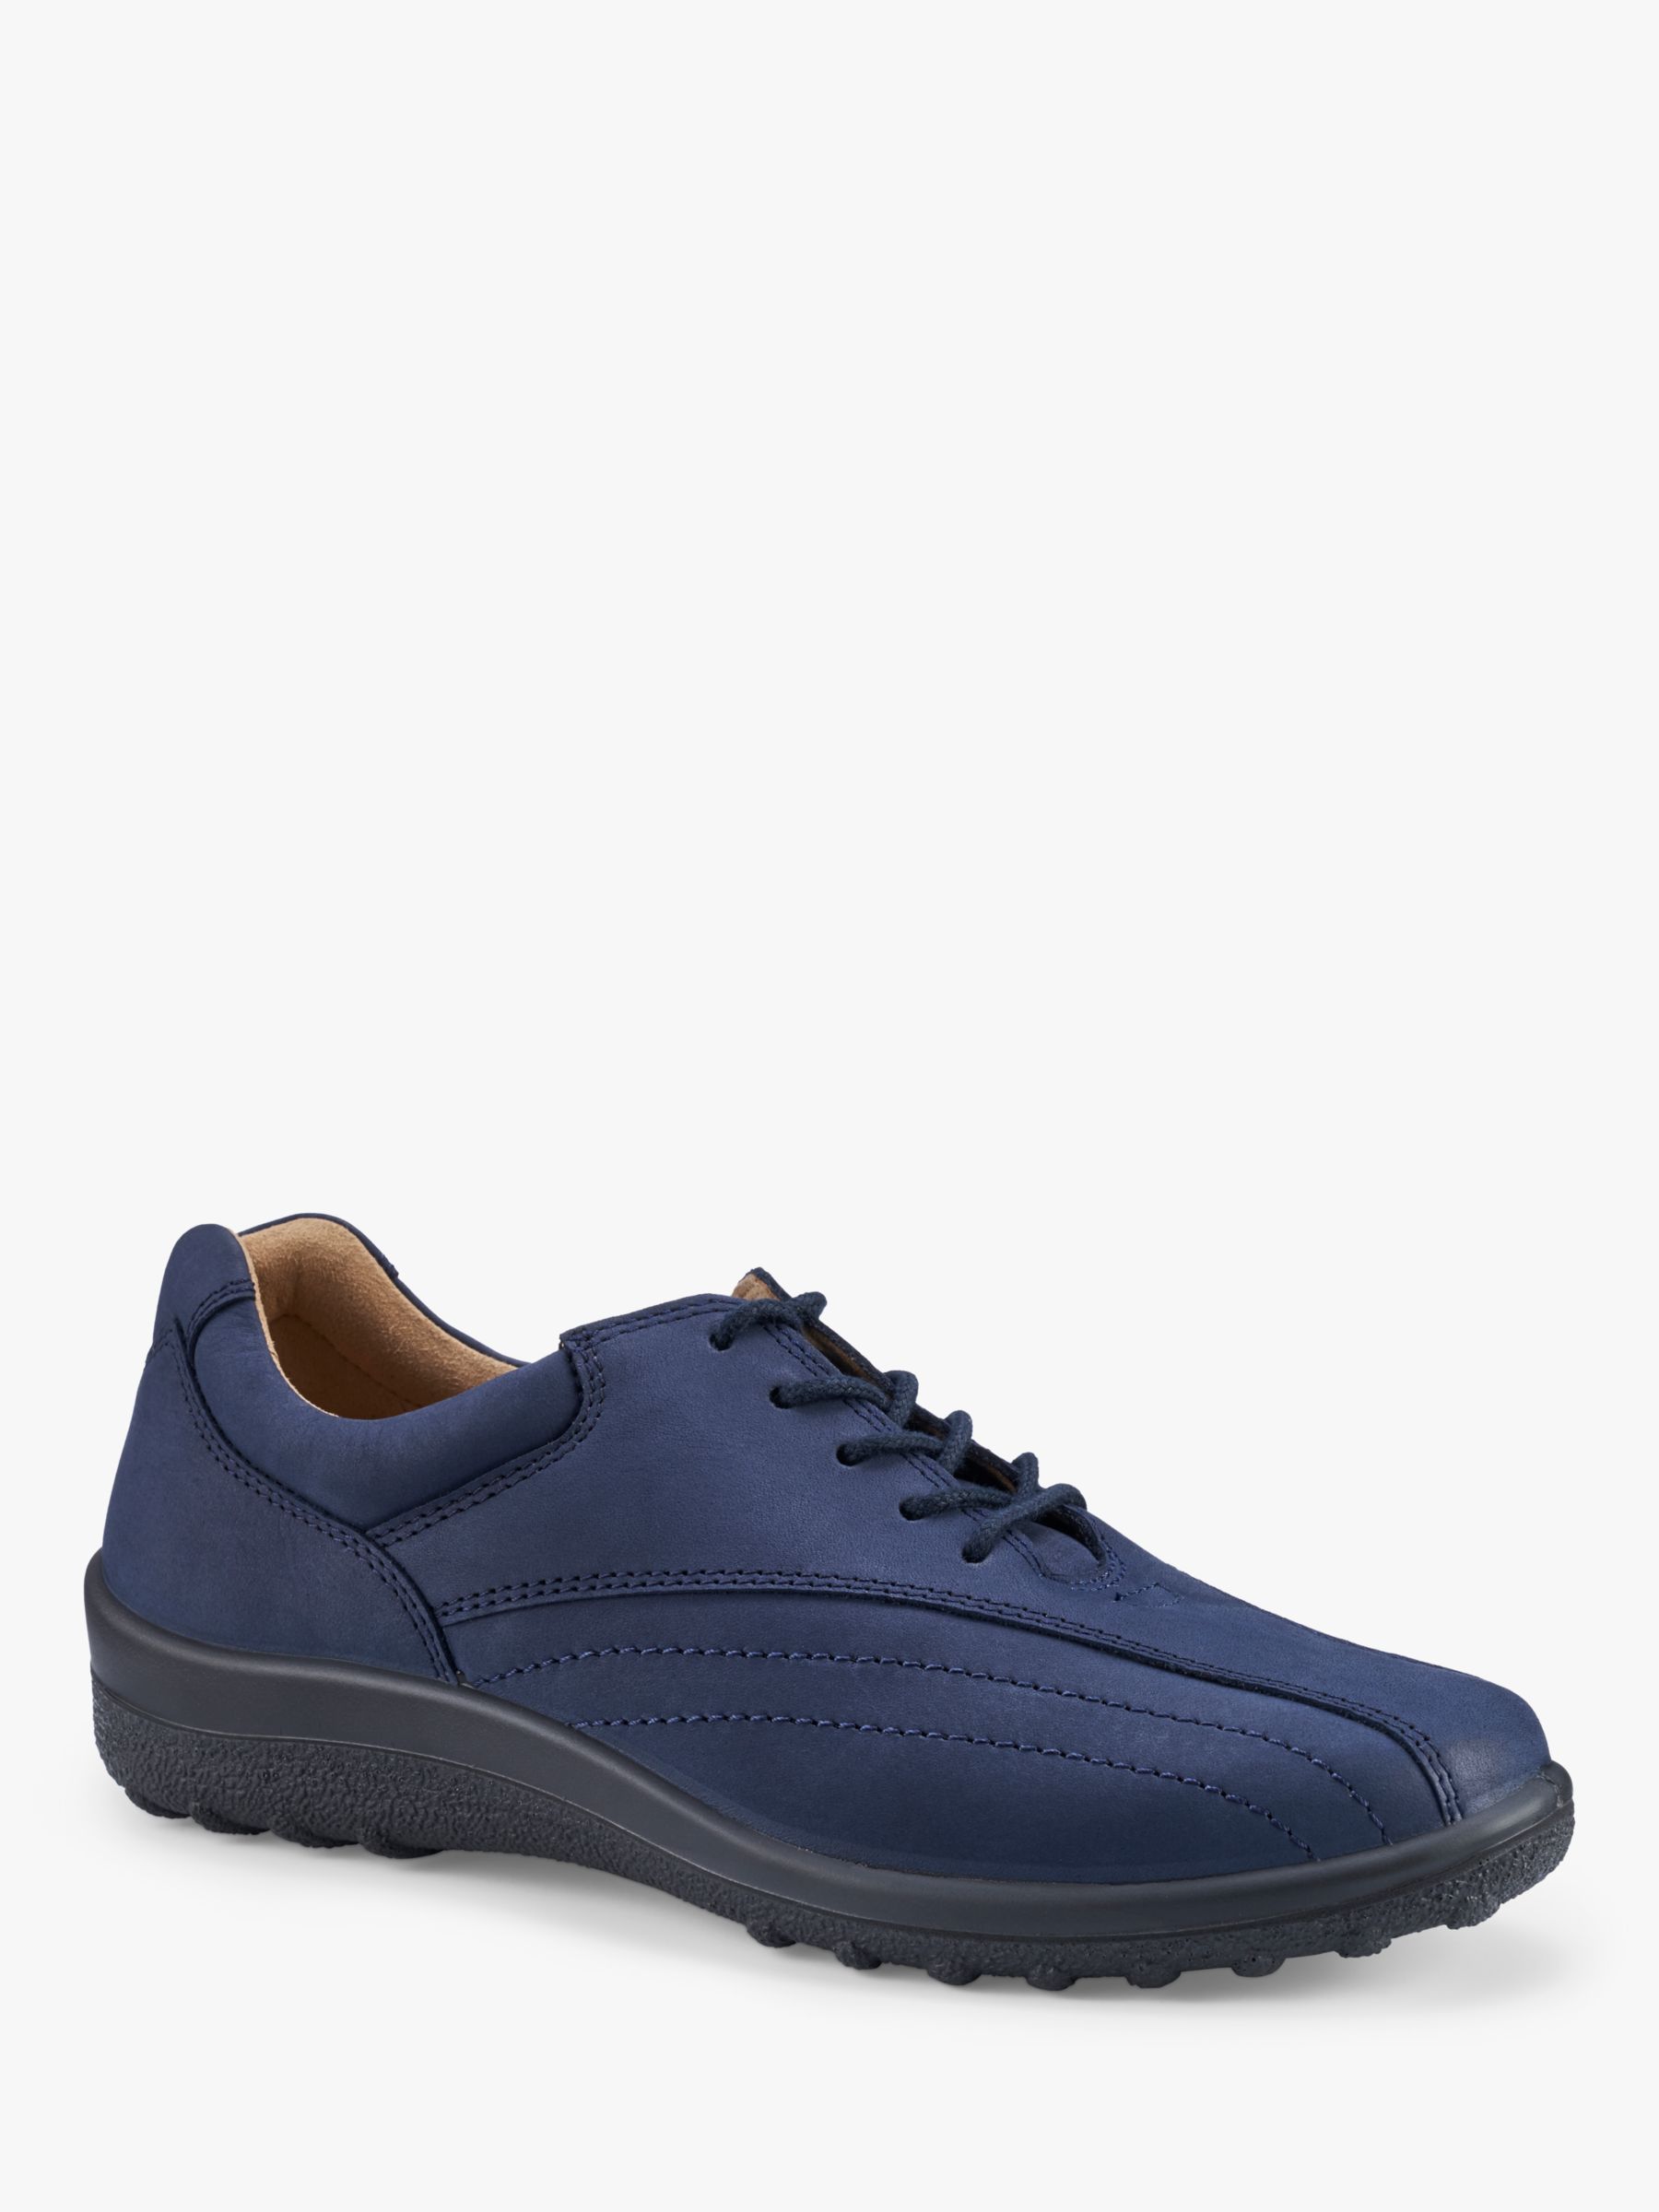 Hotter Tone II Extra Wide Fit Classic Nubuck Bowling Style Shoes, Denim Navy, 7